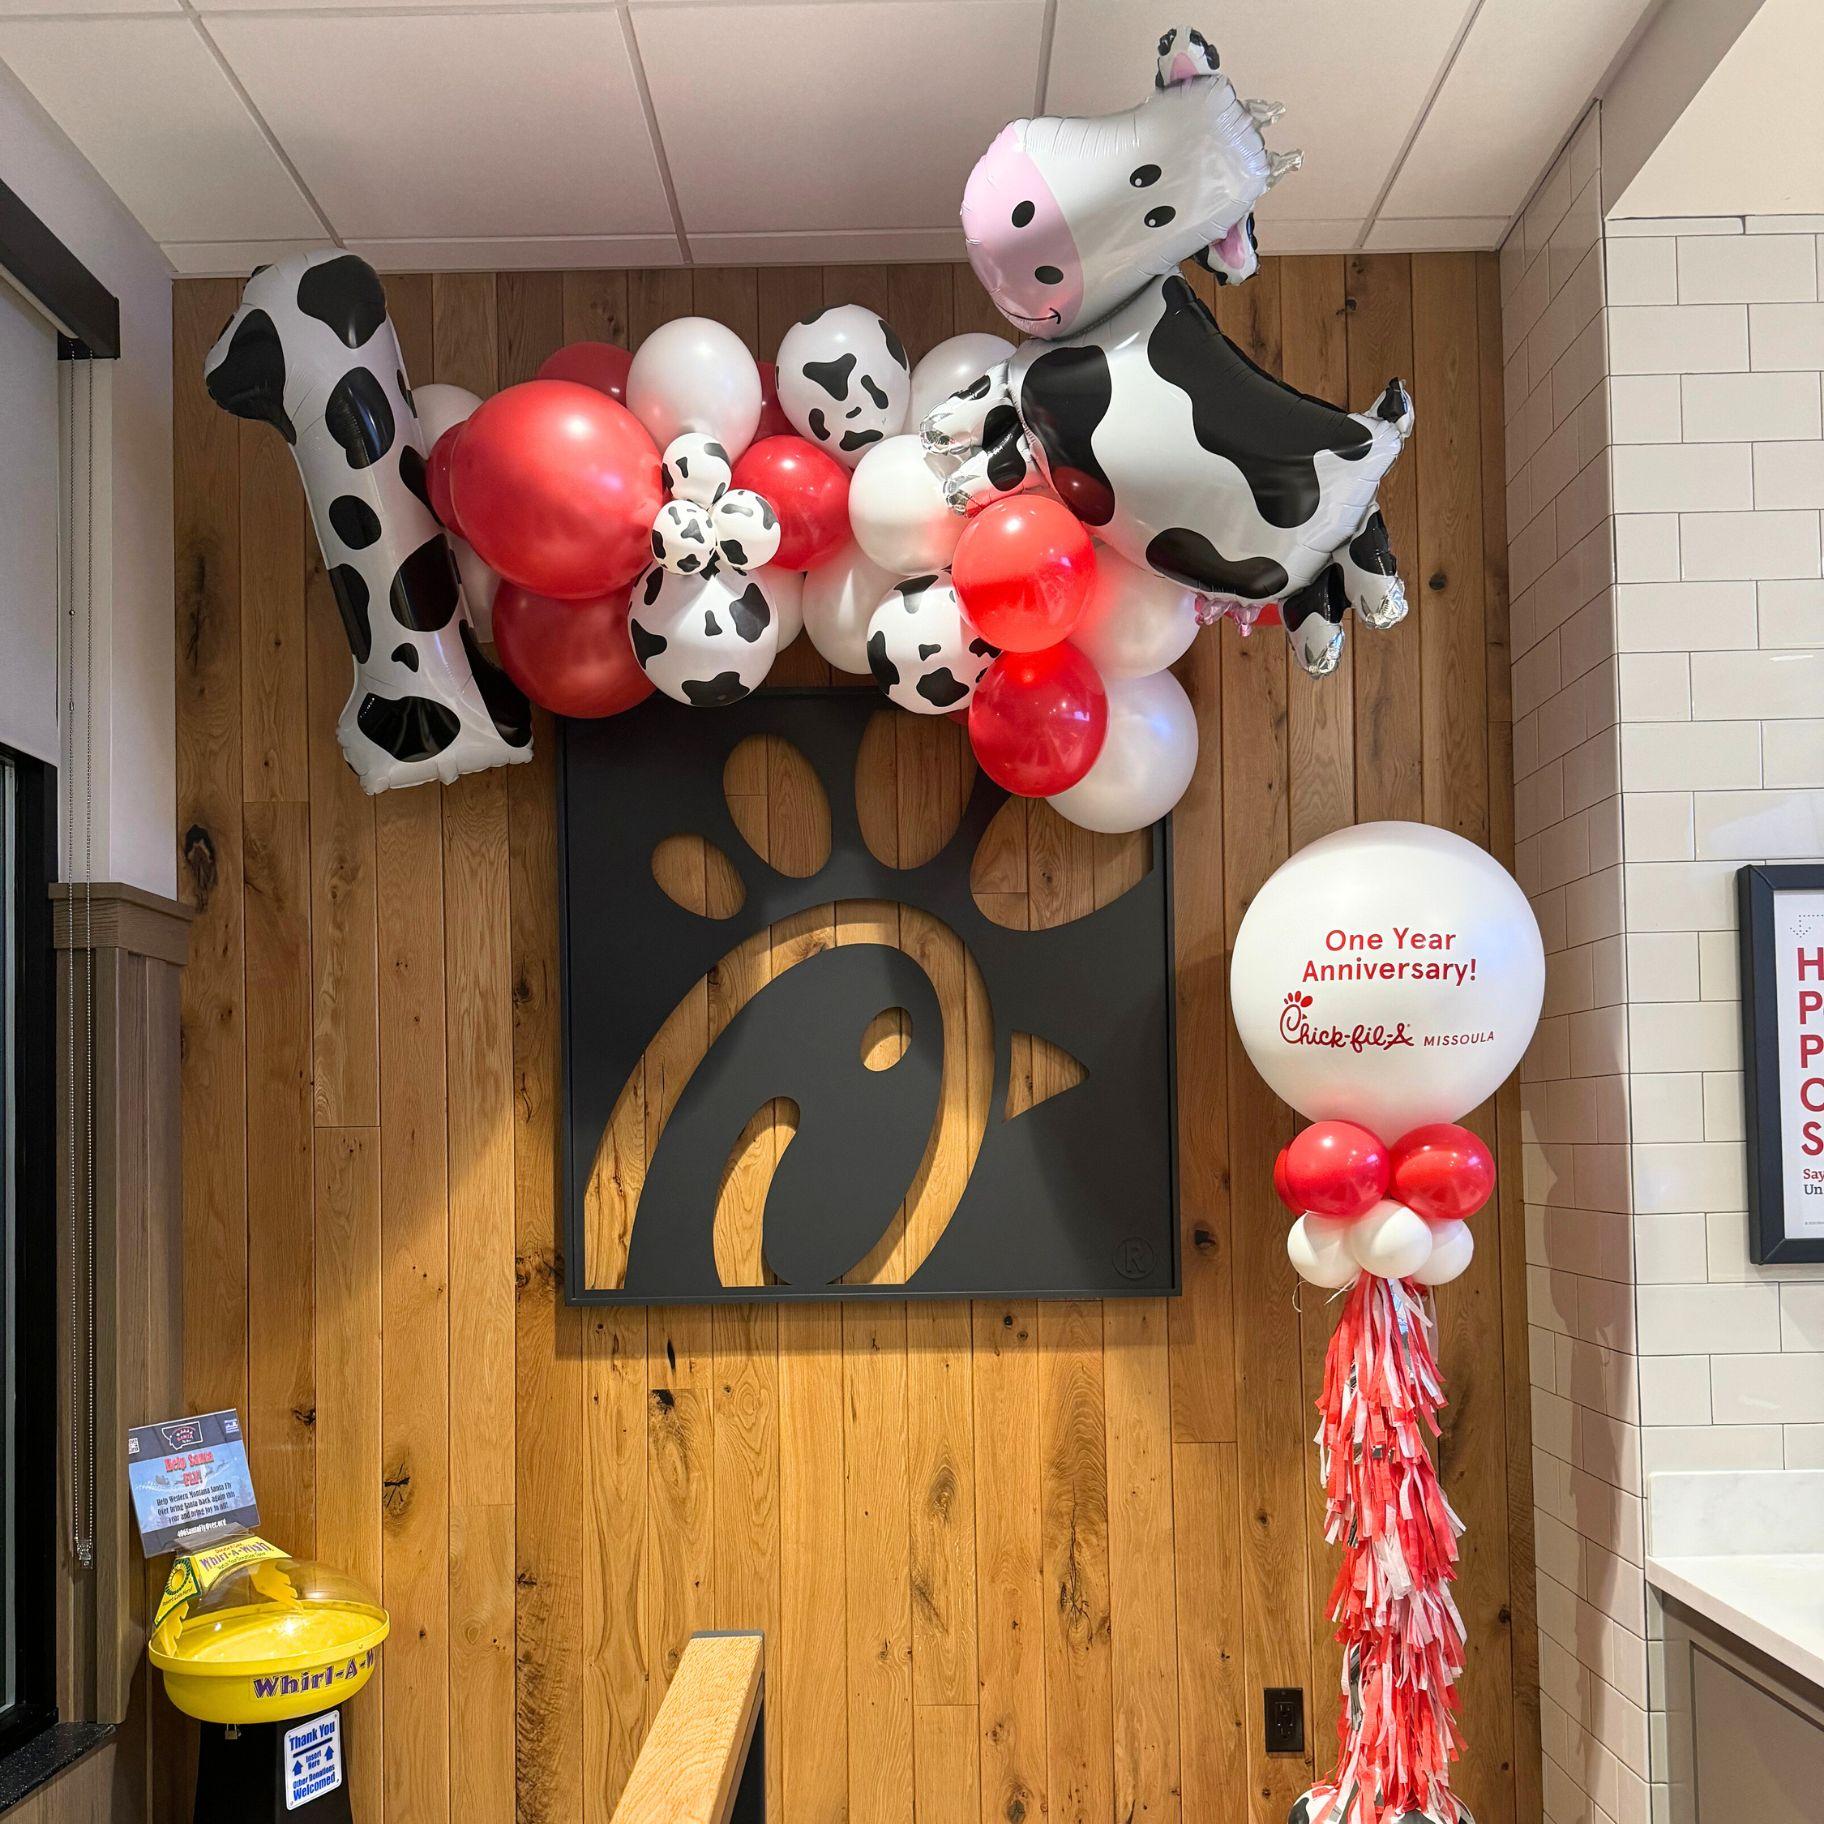 Chick-fil-A One Year Anniversary - garland